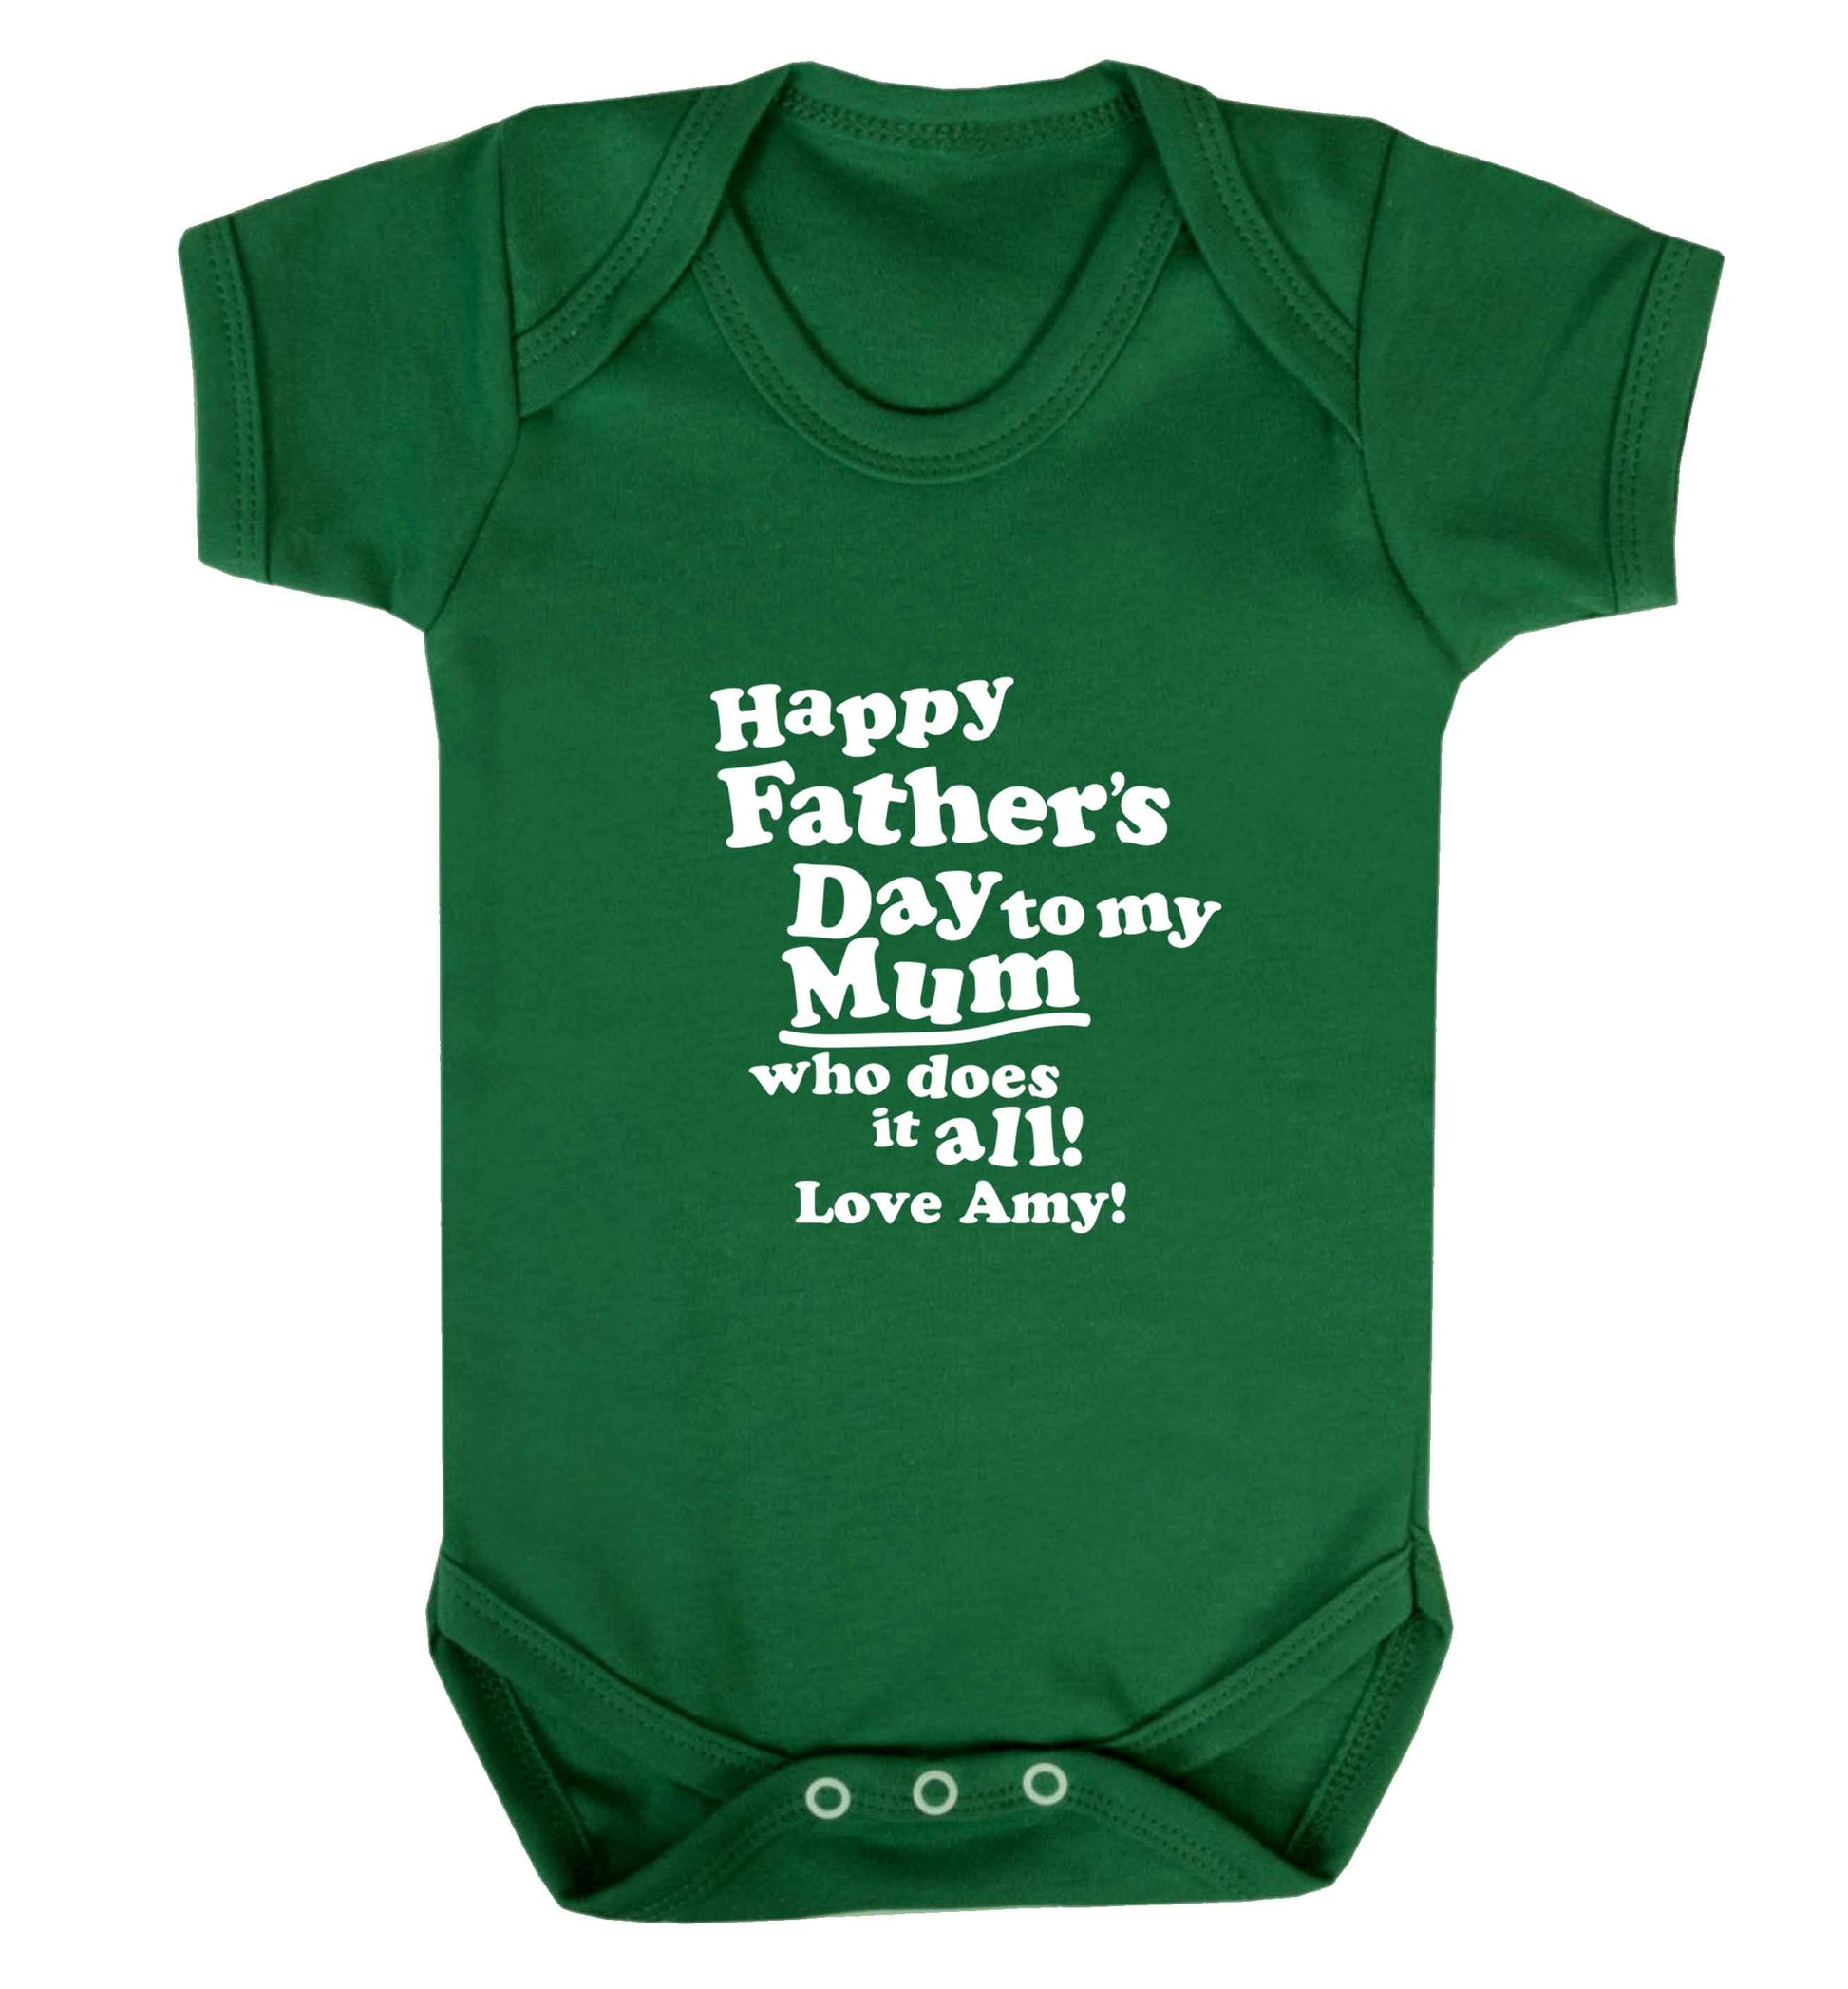 Happy Father's day to my mum who does it all baby vest green 18-24 months